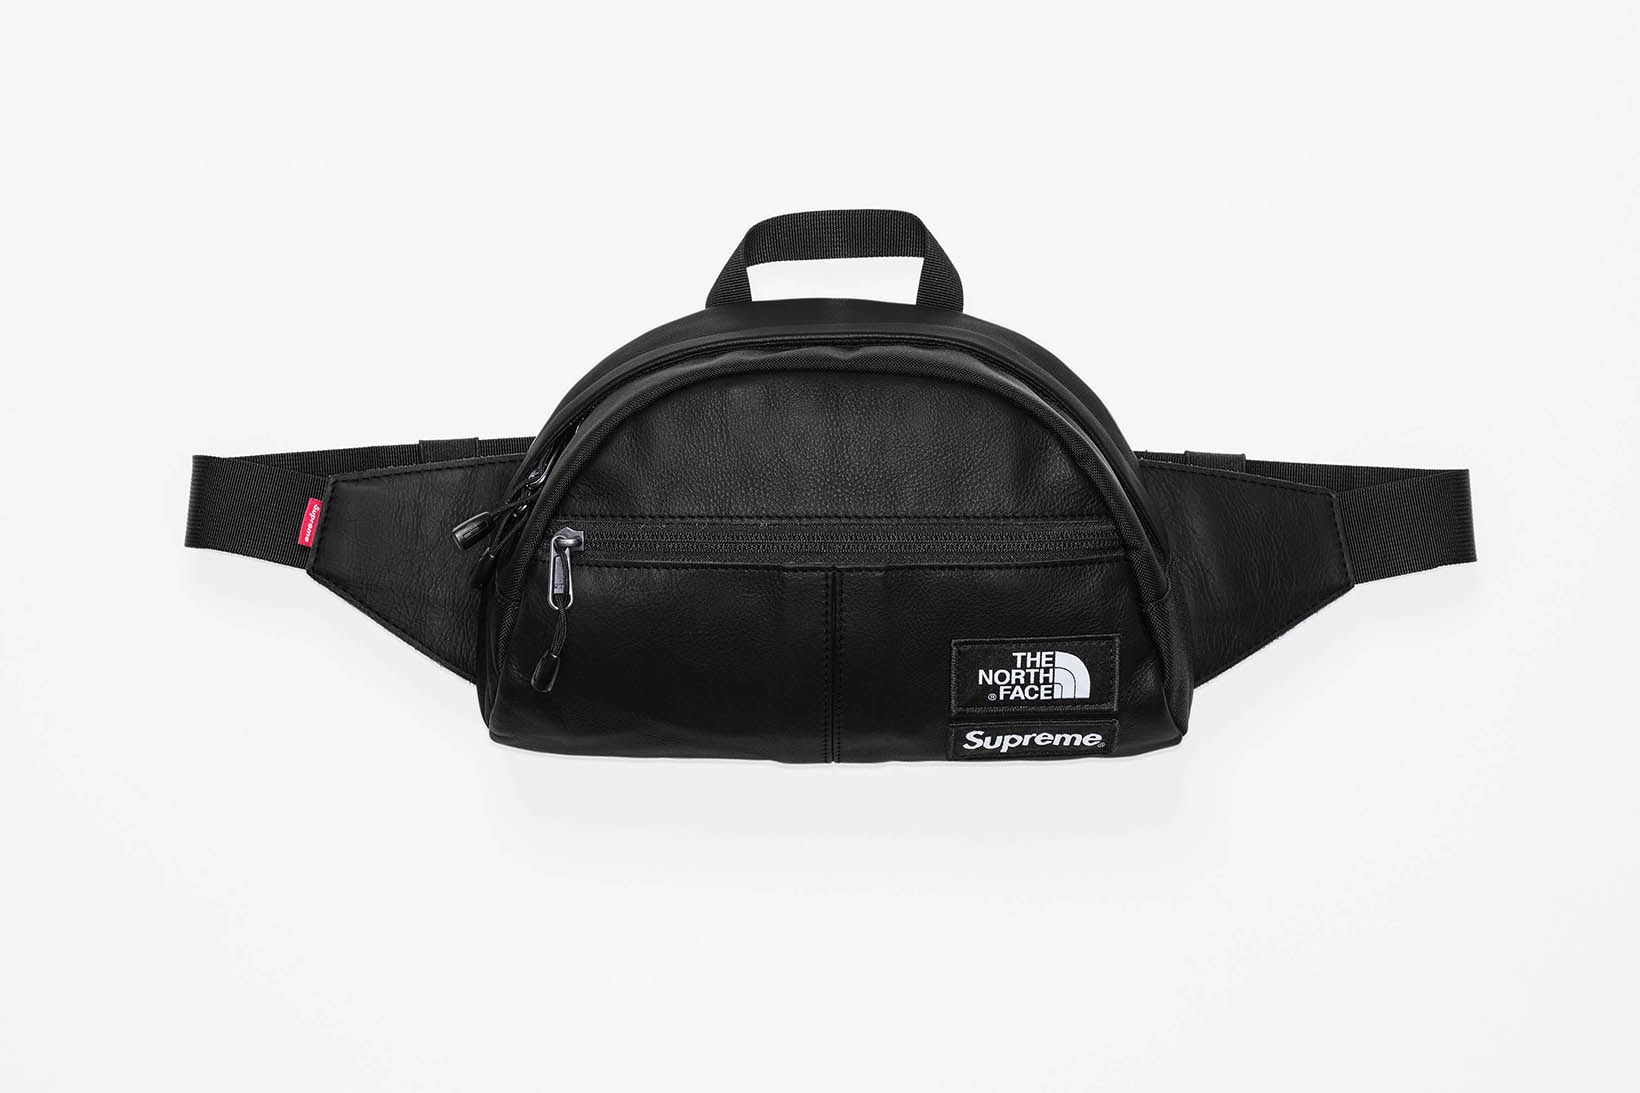 Supreme x The North Face 2017 Fall Black Daypack